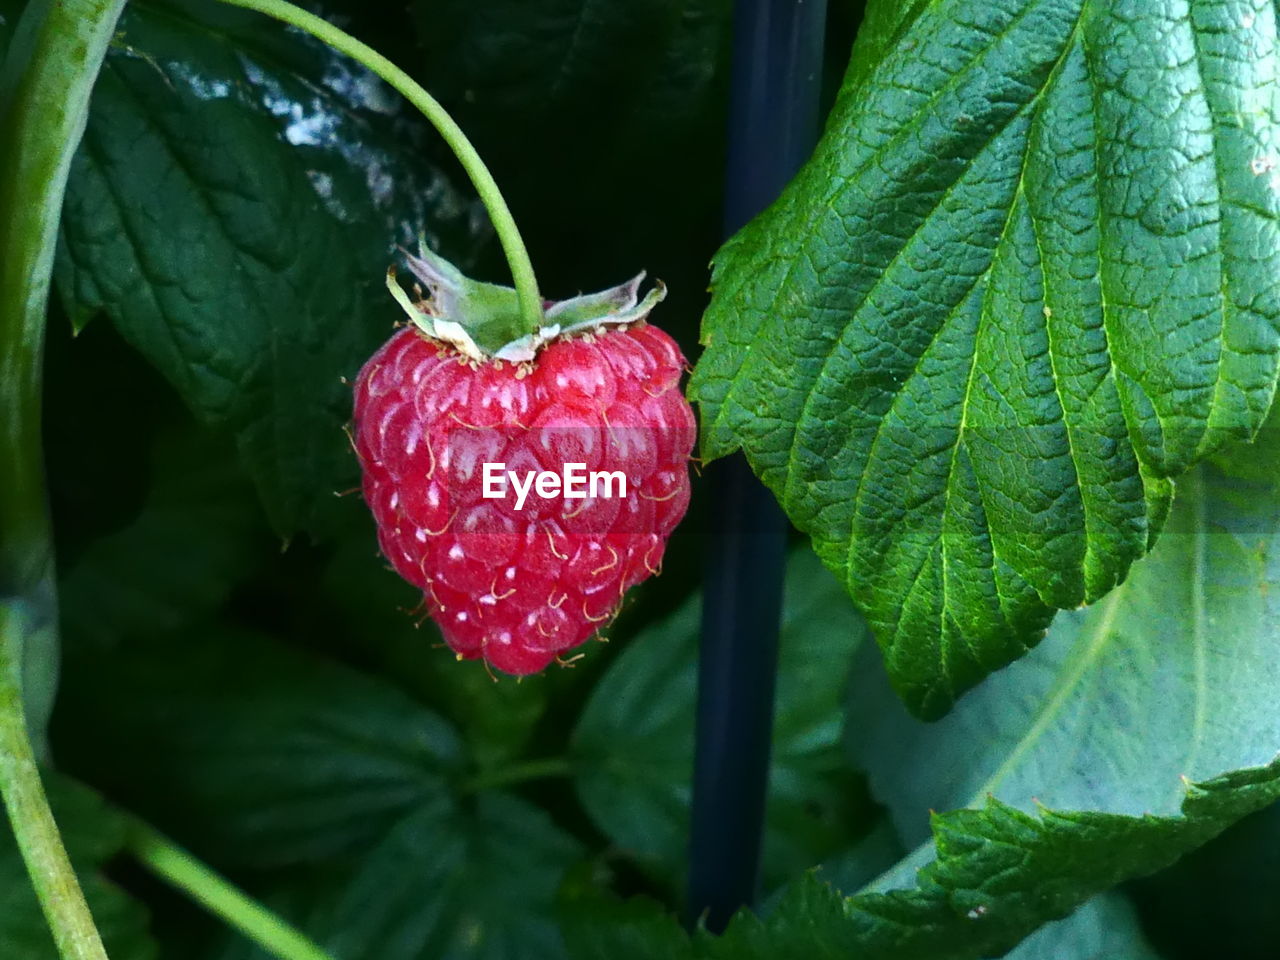 CLOSE-UP OF STRAWBERRY GROWING ON PLANT OUTDOORS